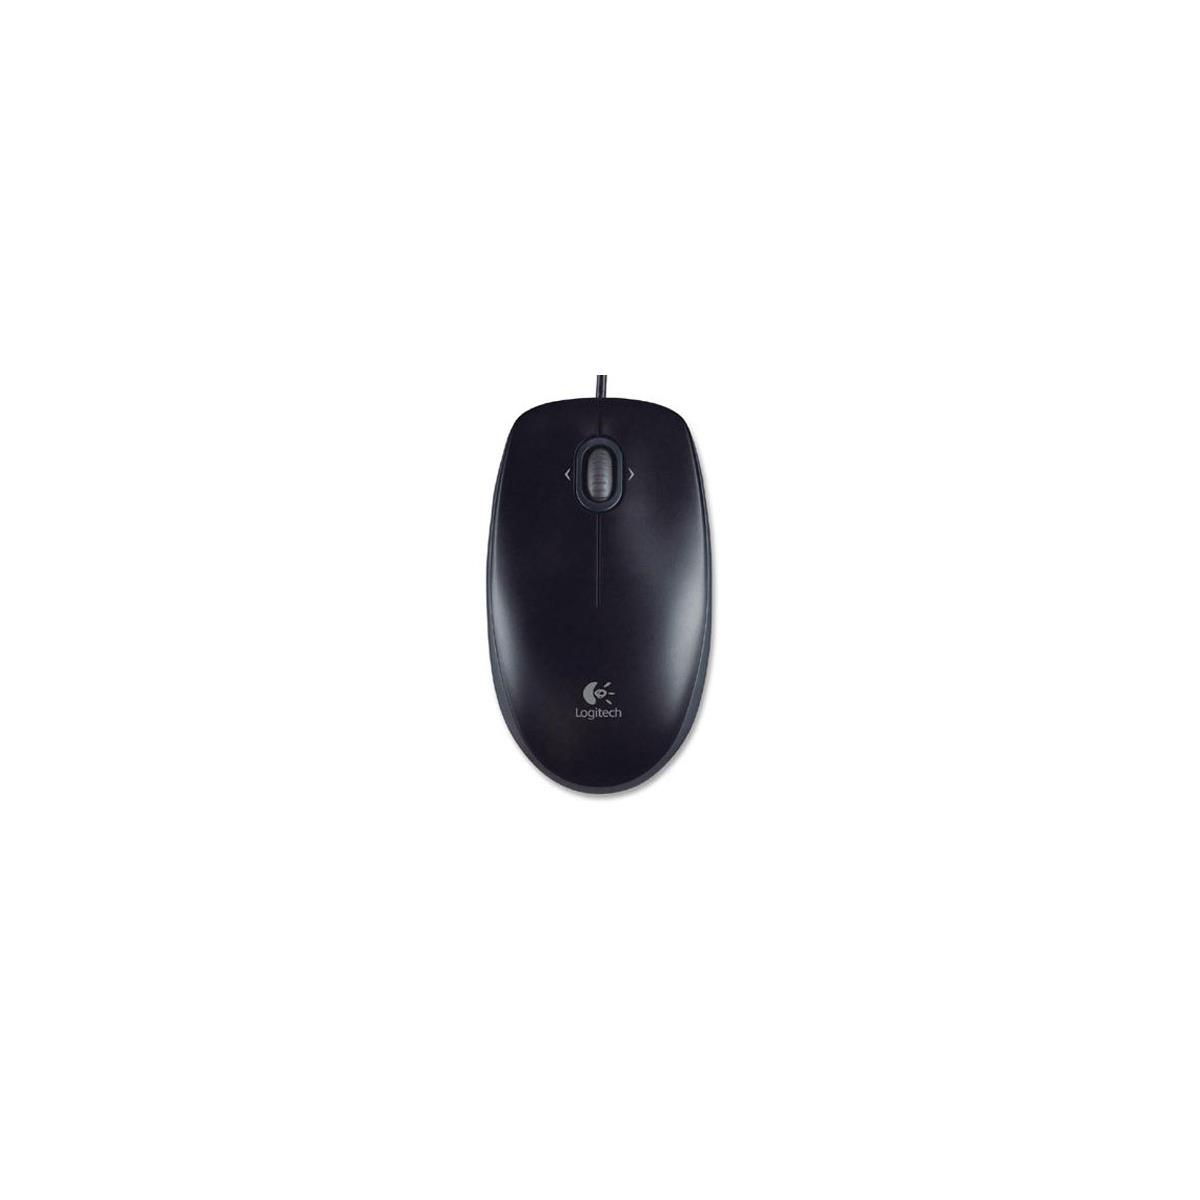 Image of Logitech M100 USB Optical Wired Mouse